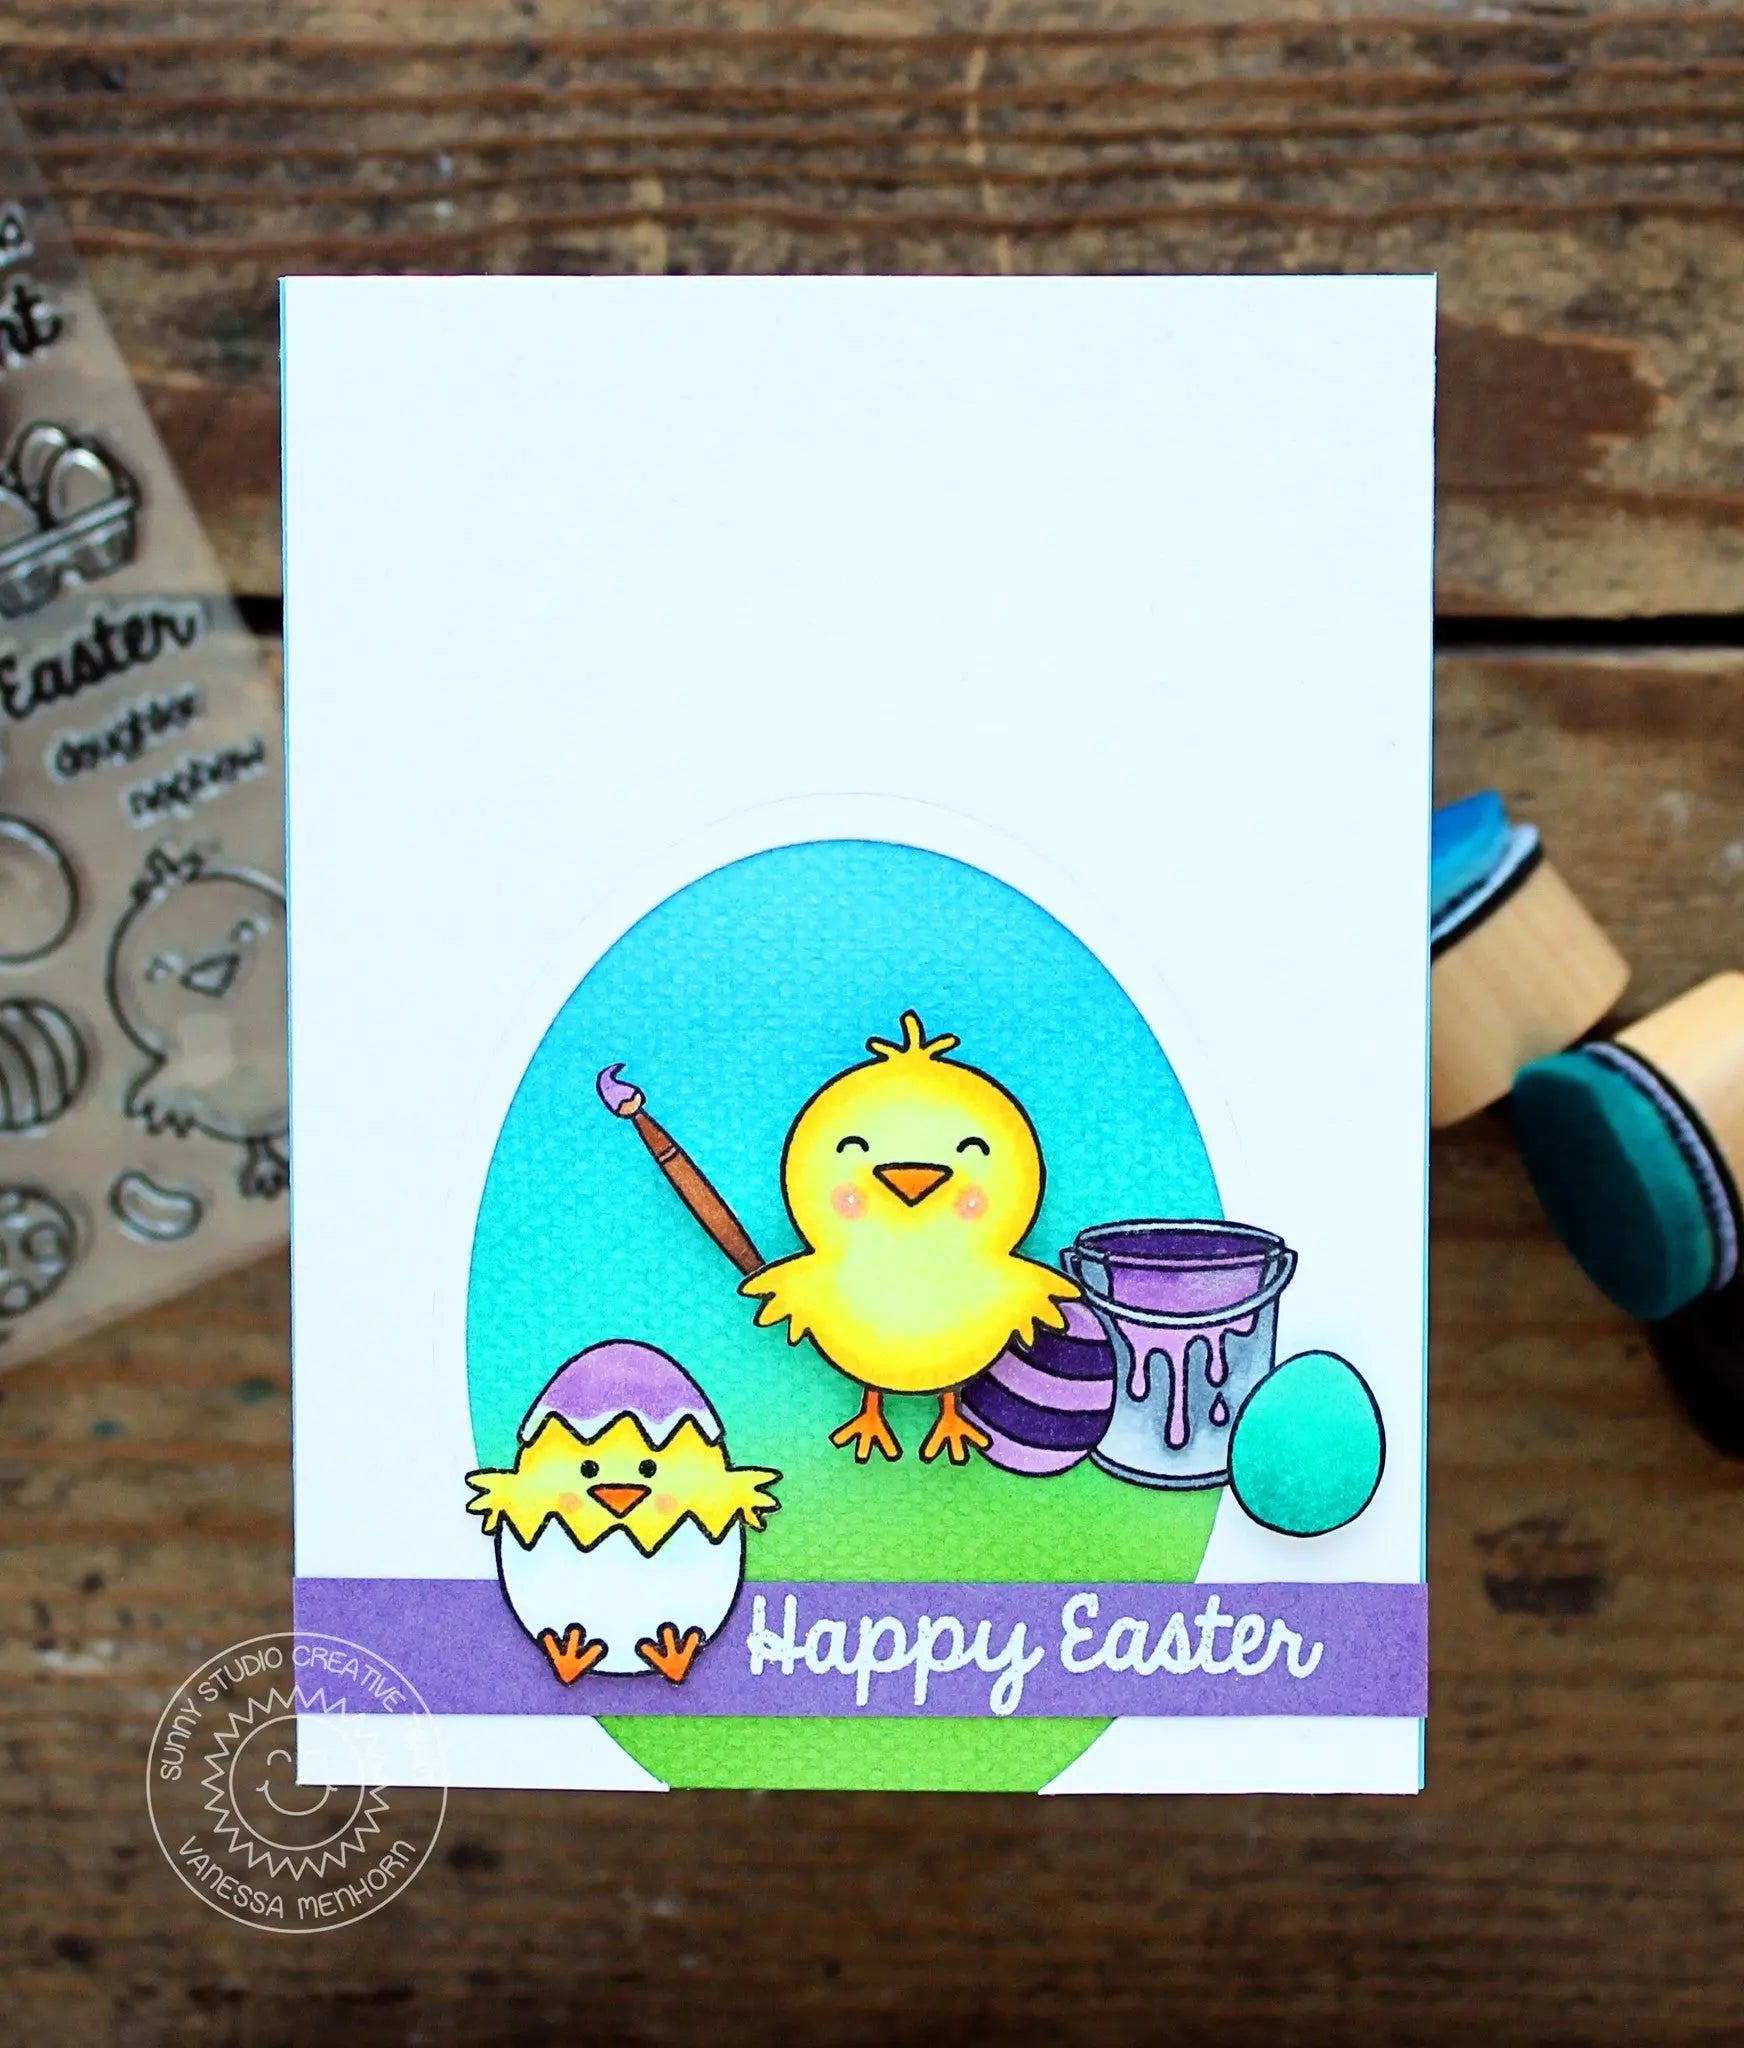 Sunny Studio Stamps Chick Painting Easter Eggs Card by Vanessa Menhorn.